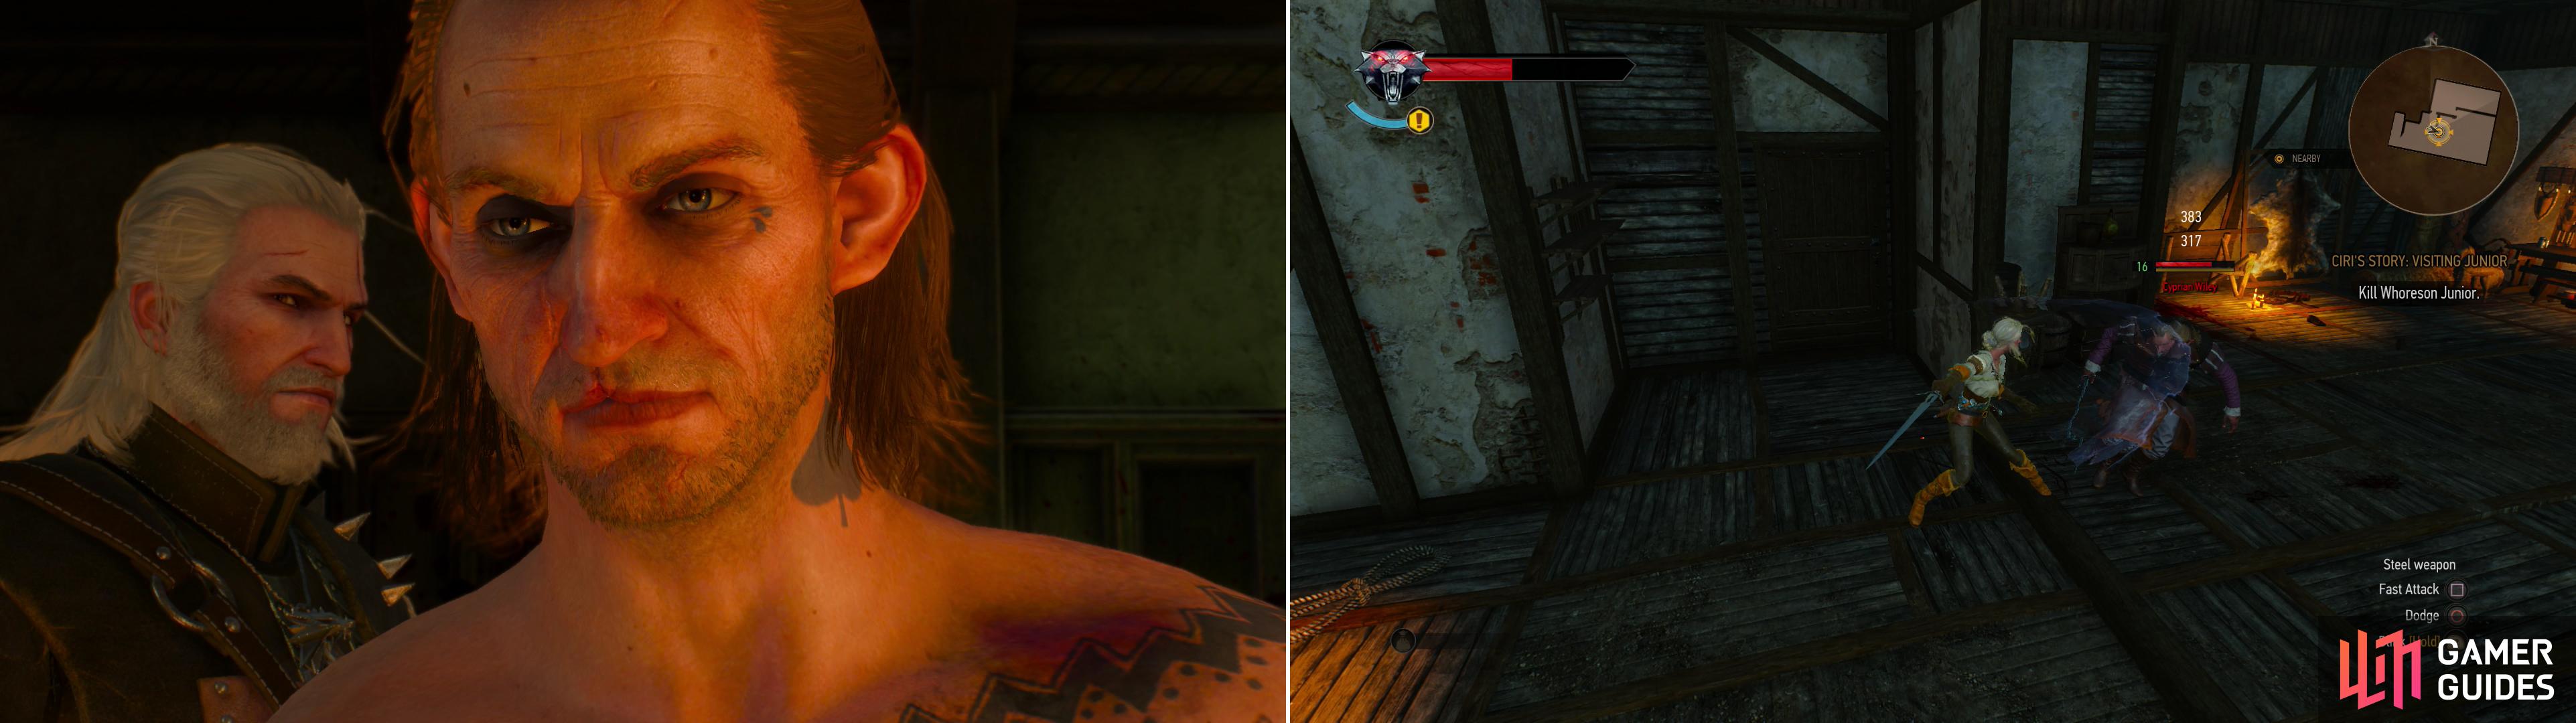 Confront Whorseon Junior in his estate (left) then witness (and replay) his earlier interactions with Ciri (right).